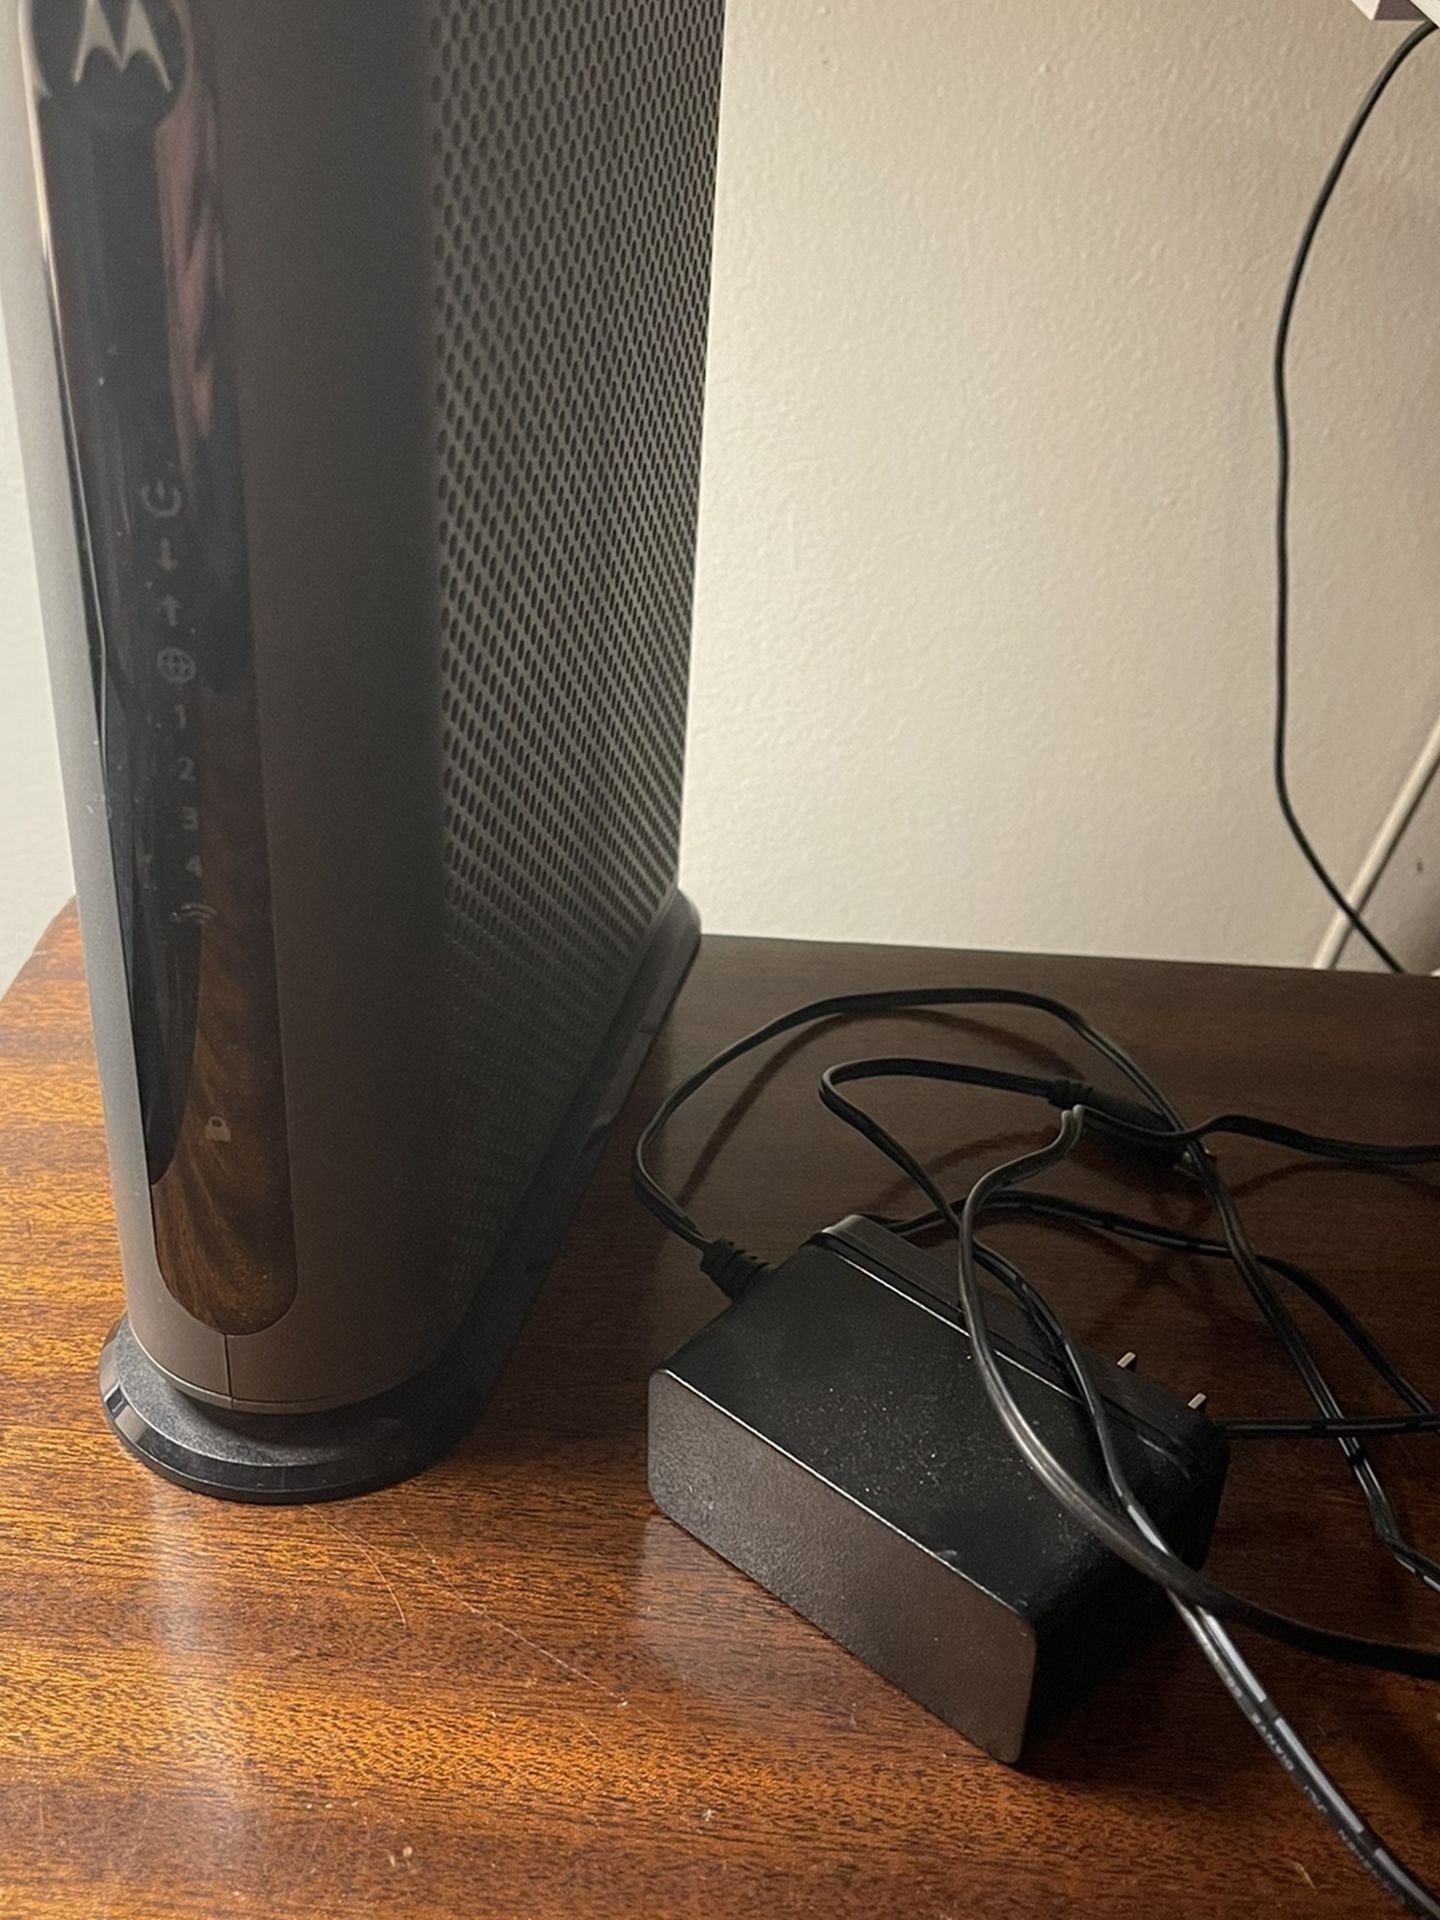 Cable Modem And Wifi Router - Motorola MG7315